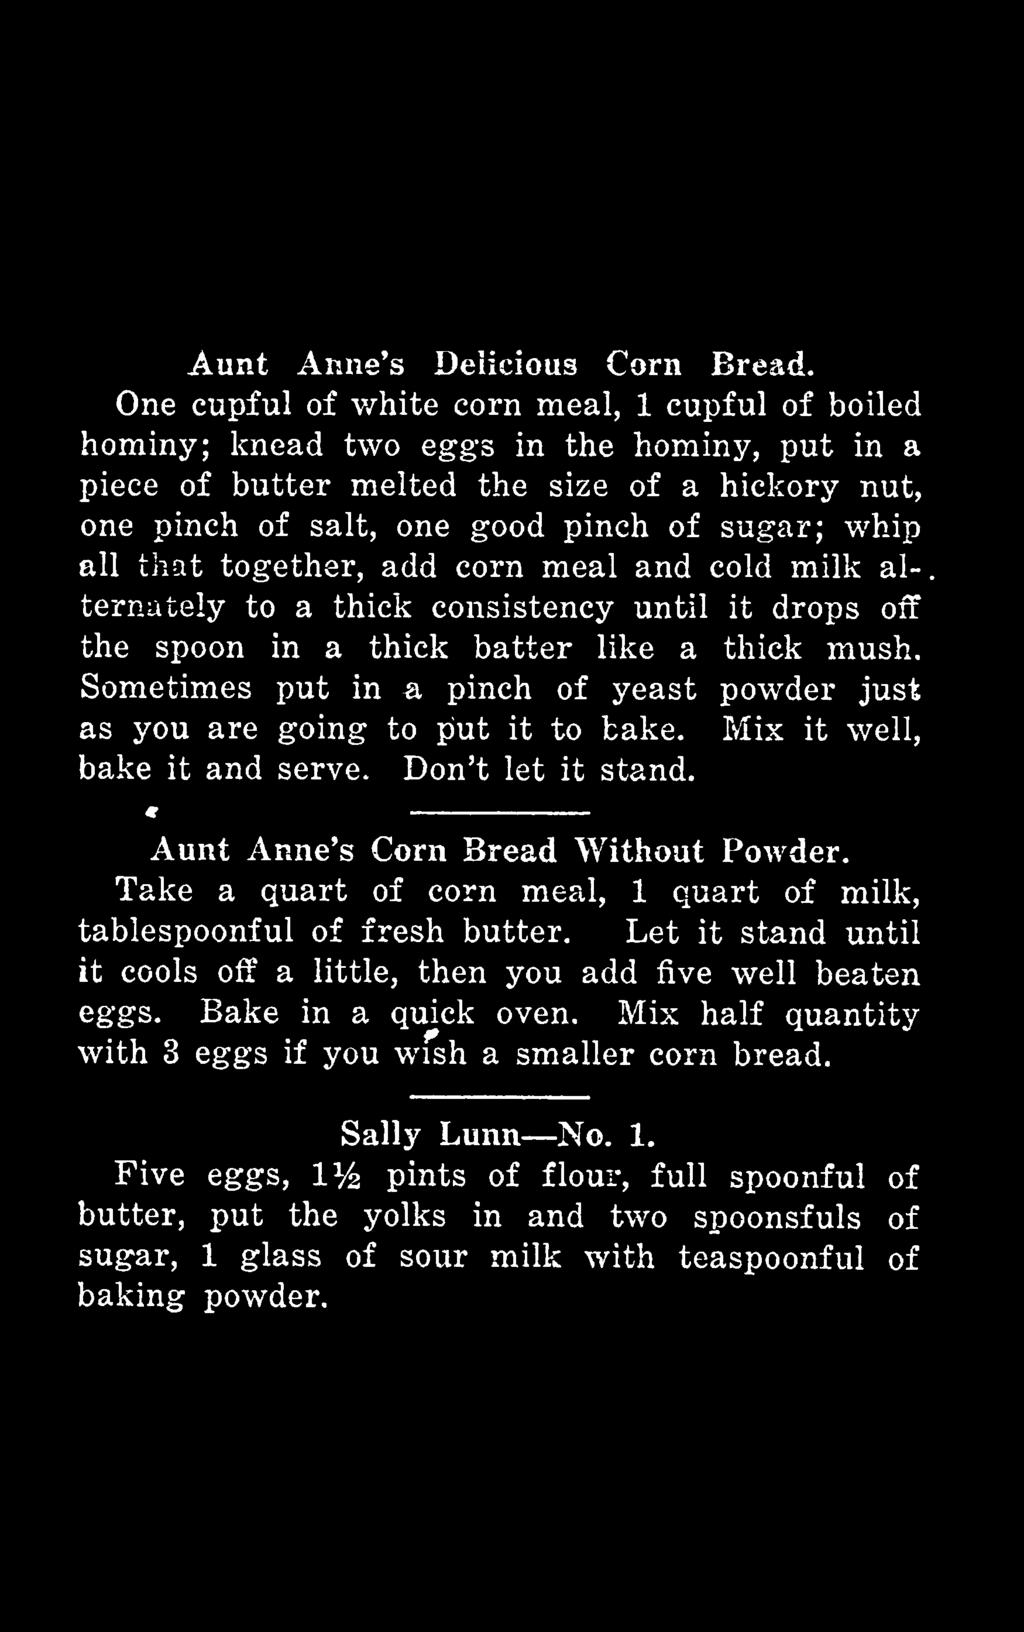 Aunt Anne's Corn Bread Without Powder. Take a quart of corn meal, 1 quart of milk, tablespoonful of fresh butter.